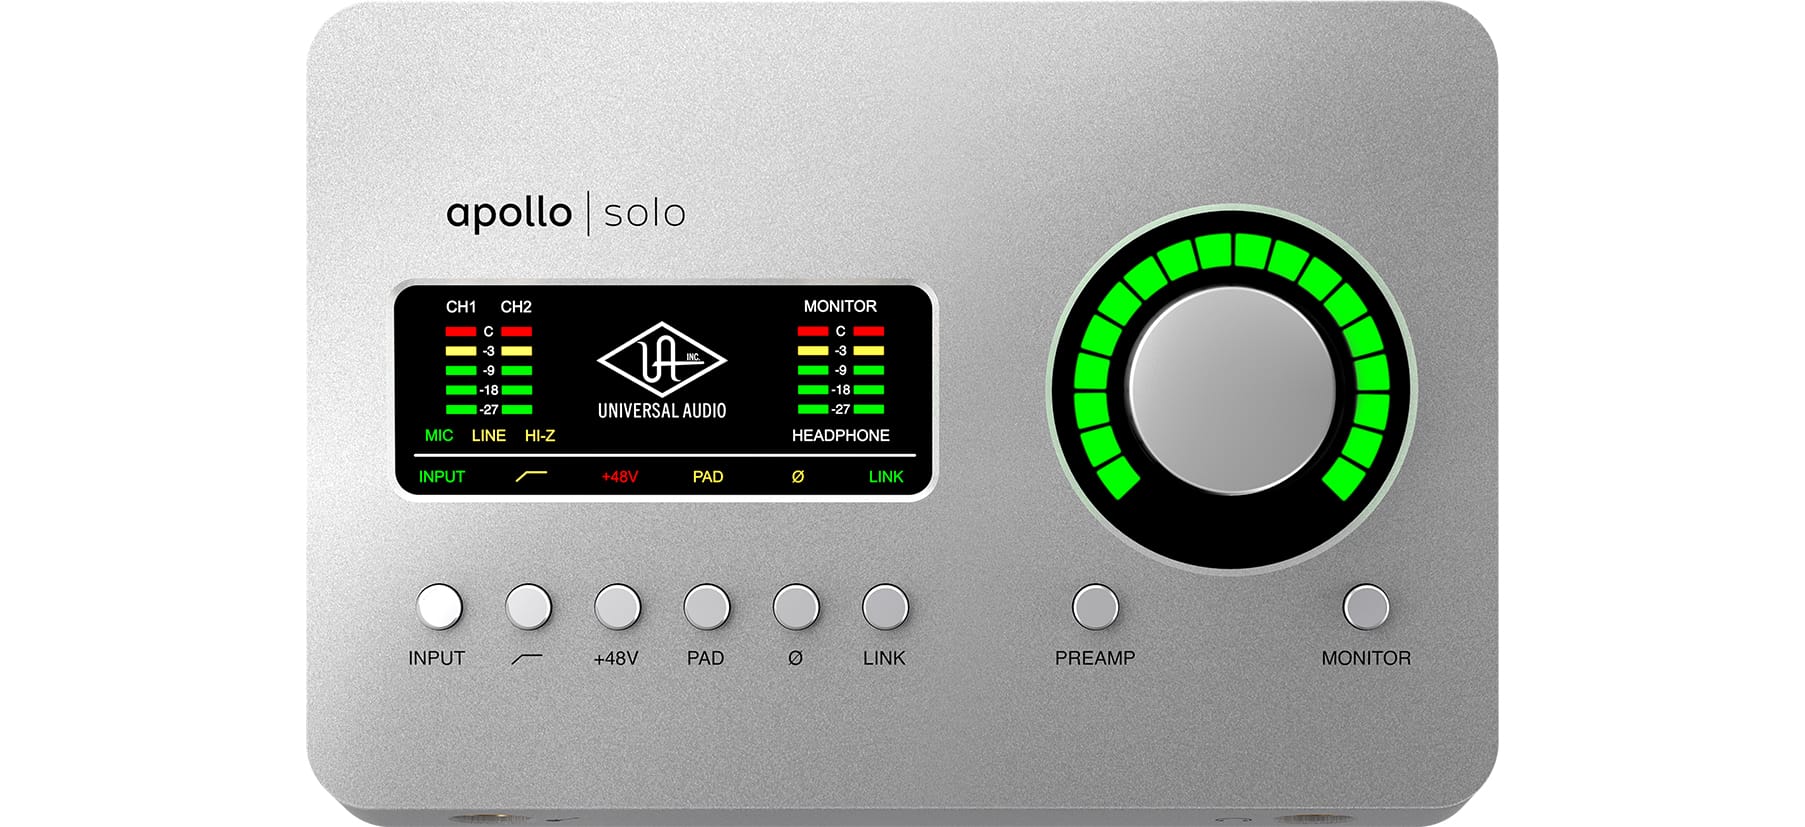 Universal Audio | Apollo Solo Heritage Edition Thunderbolt 3 Audio Interface with UAD DSP